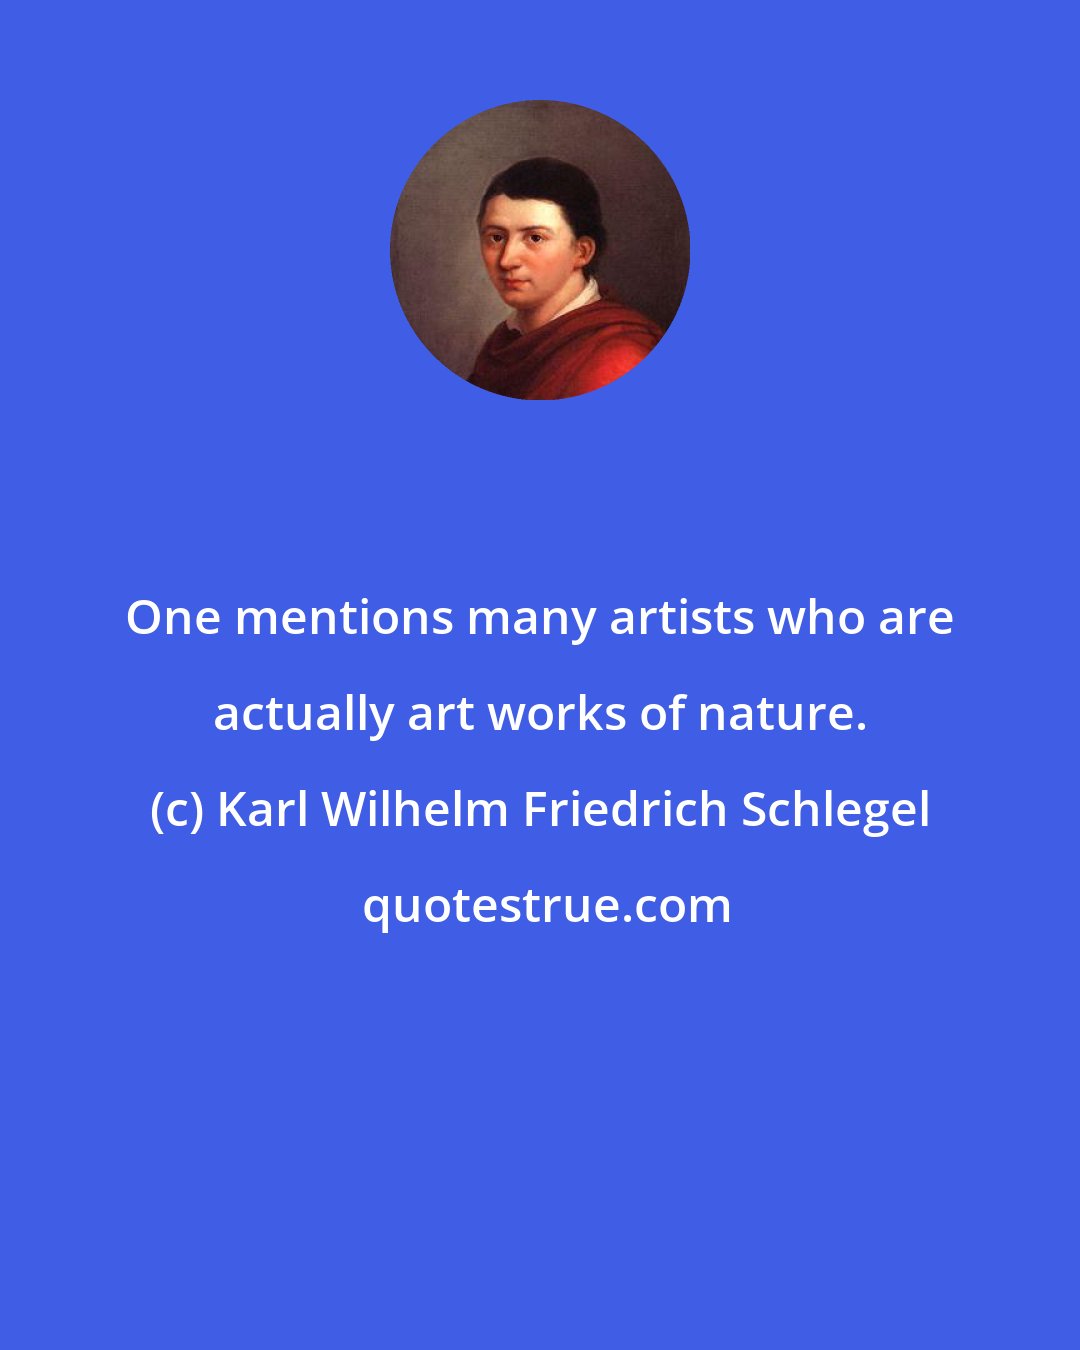 Karl Wilhelm Friedrich Schlegel: One mentions many artists who are actually art works of nature.